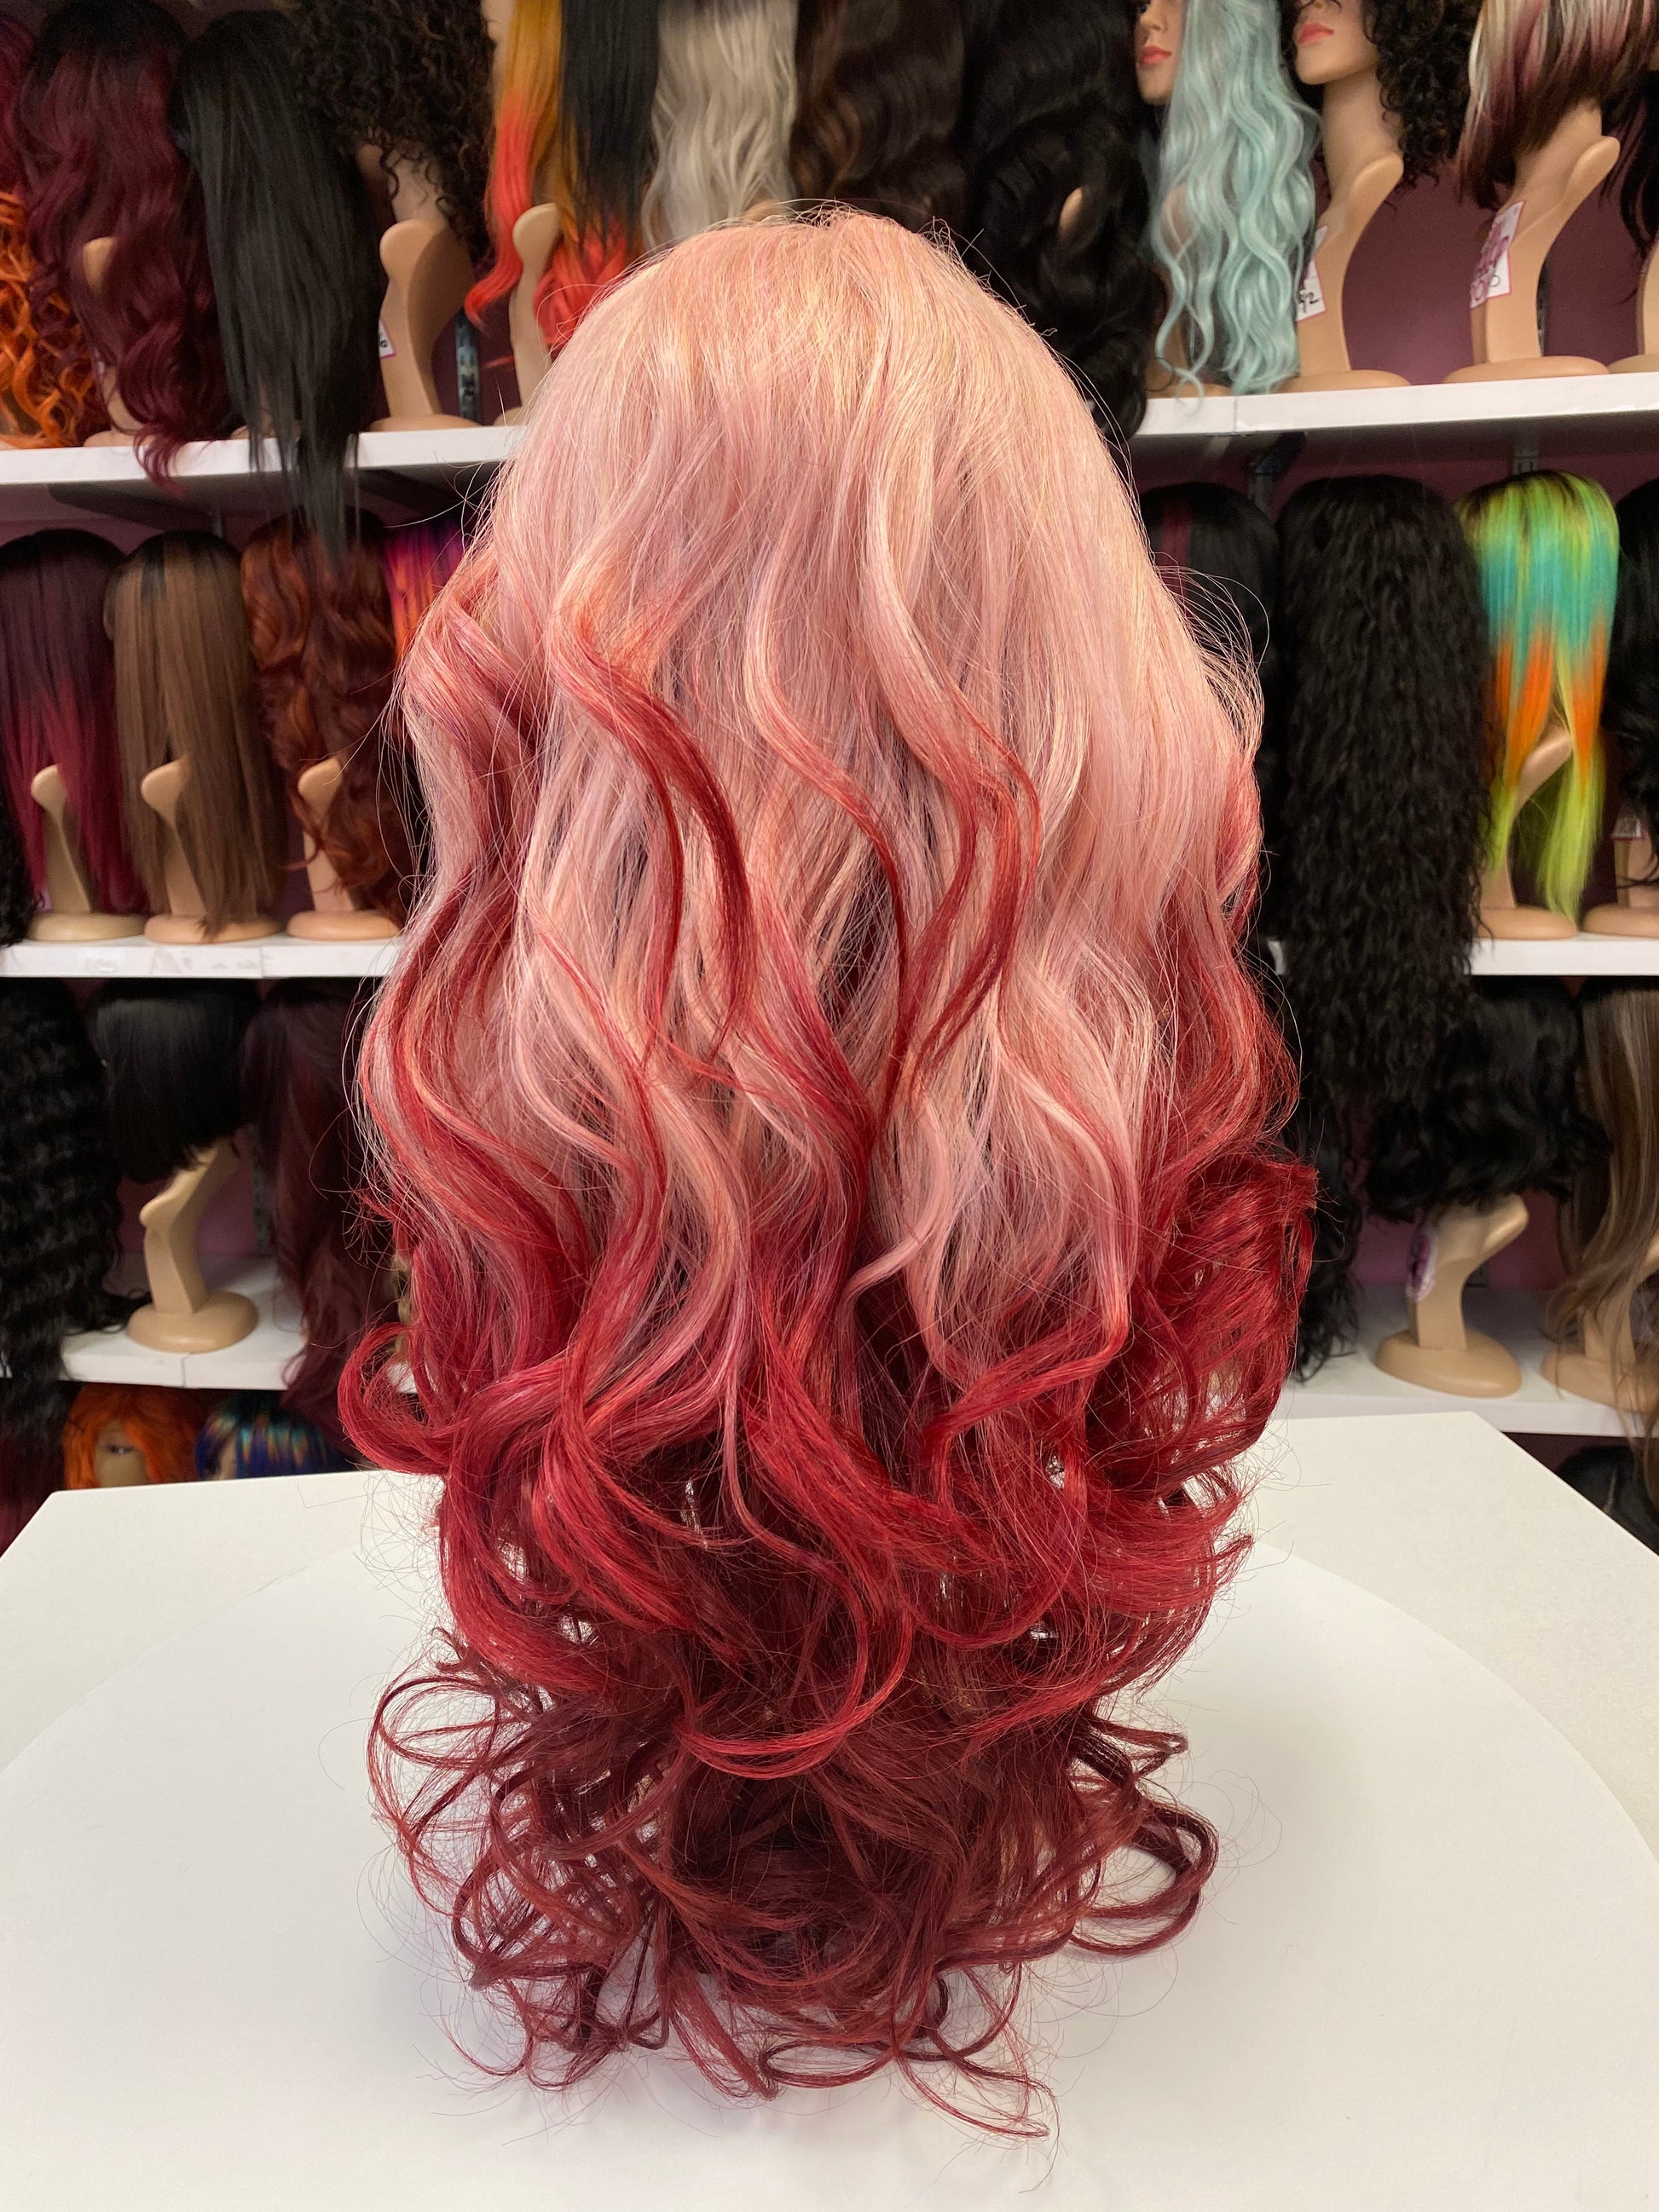 148 Riley - 13x4 Free Part Lace Front Wig - PINK TO RED - DaizyKat Cosmetics 148 Riley - 13x4 Free Part Lace Front Wig - PINK TO RED DaizyKat Cosmetics Wigs